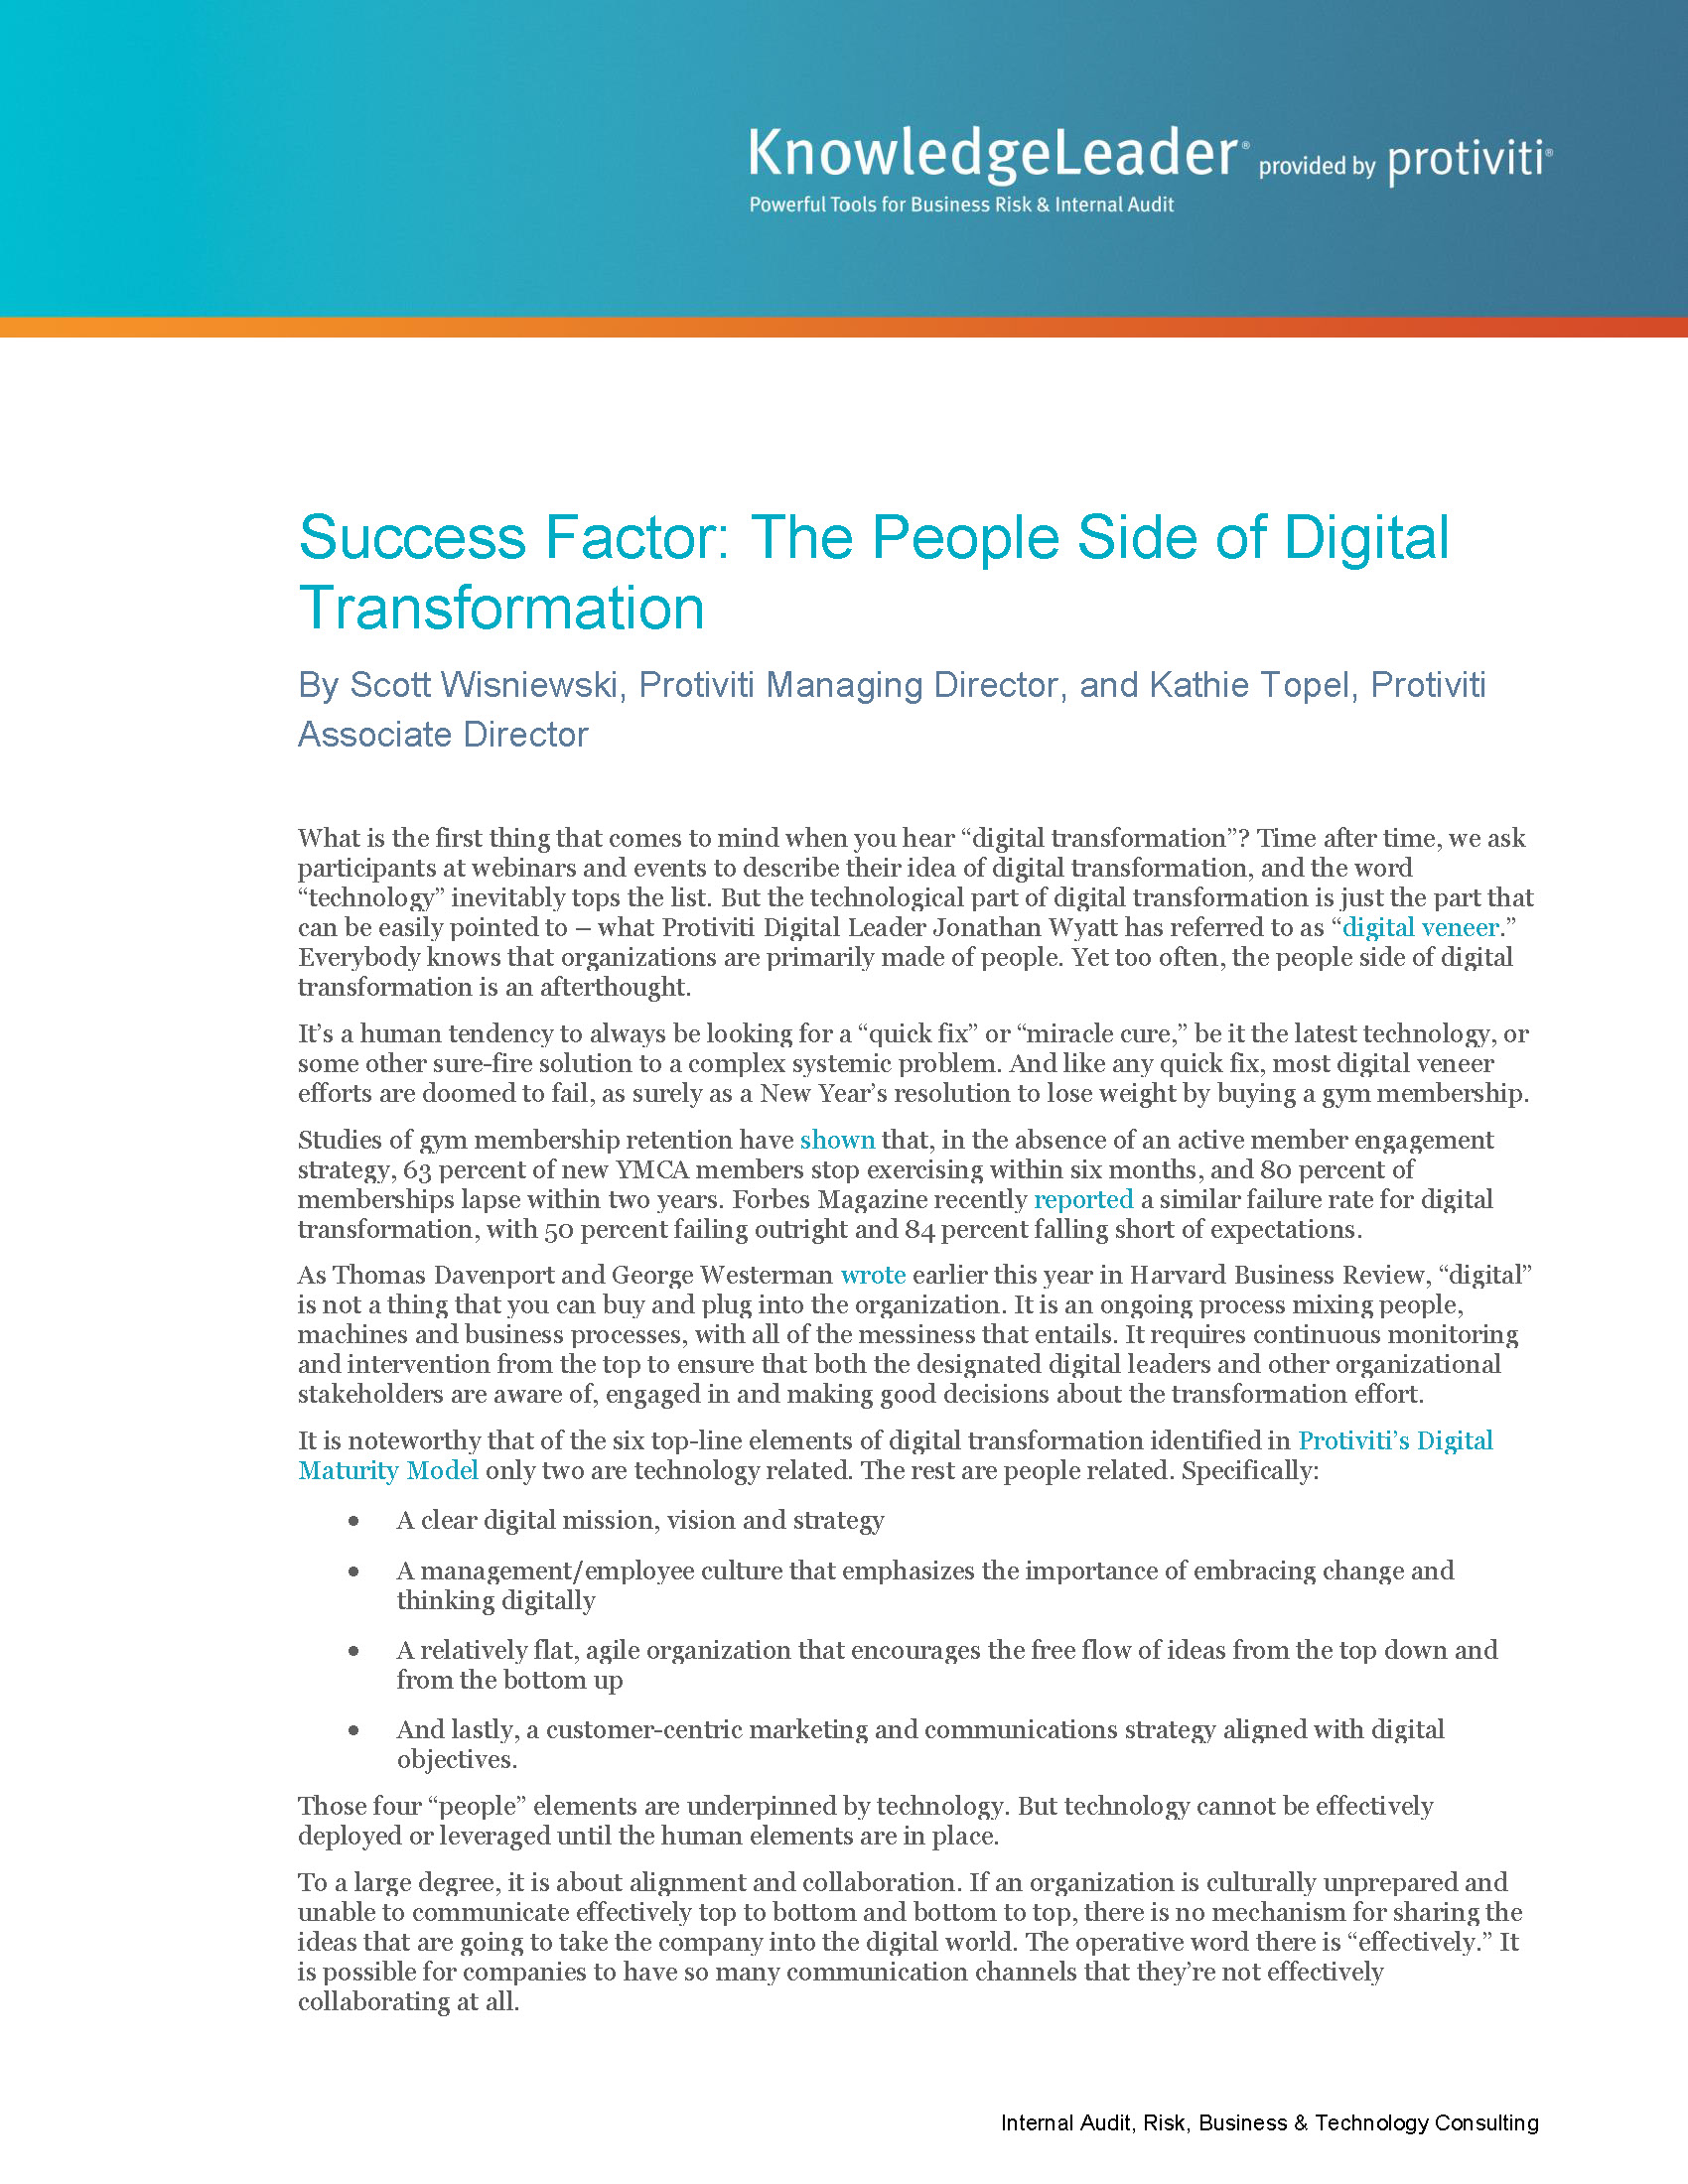 Screenshot of the first page of Success Factor The People Side of Digital Transformation